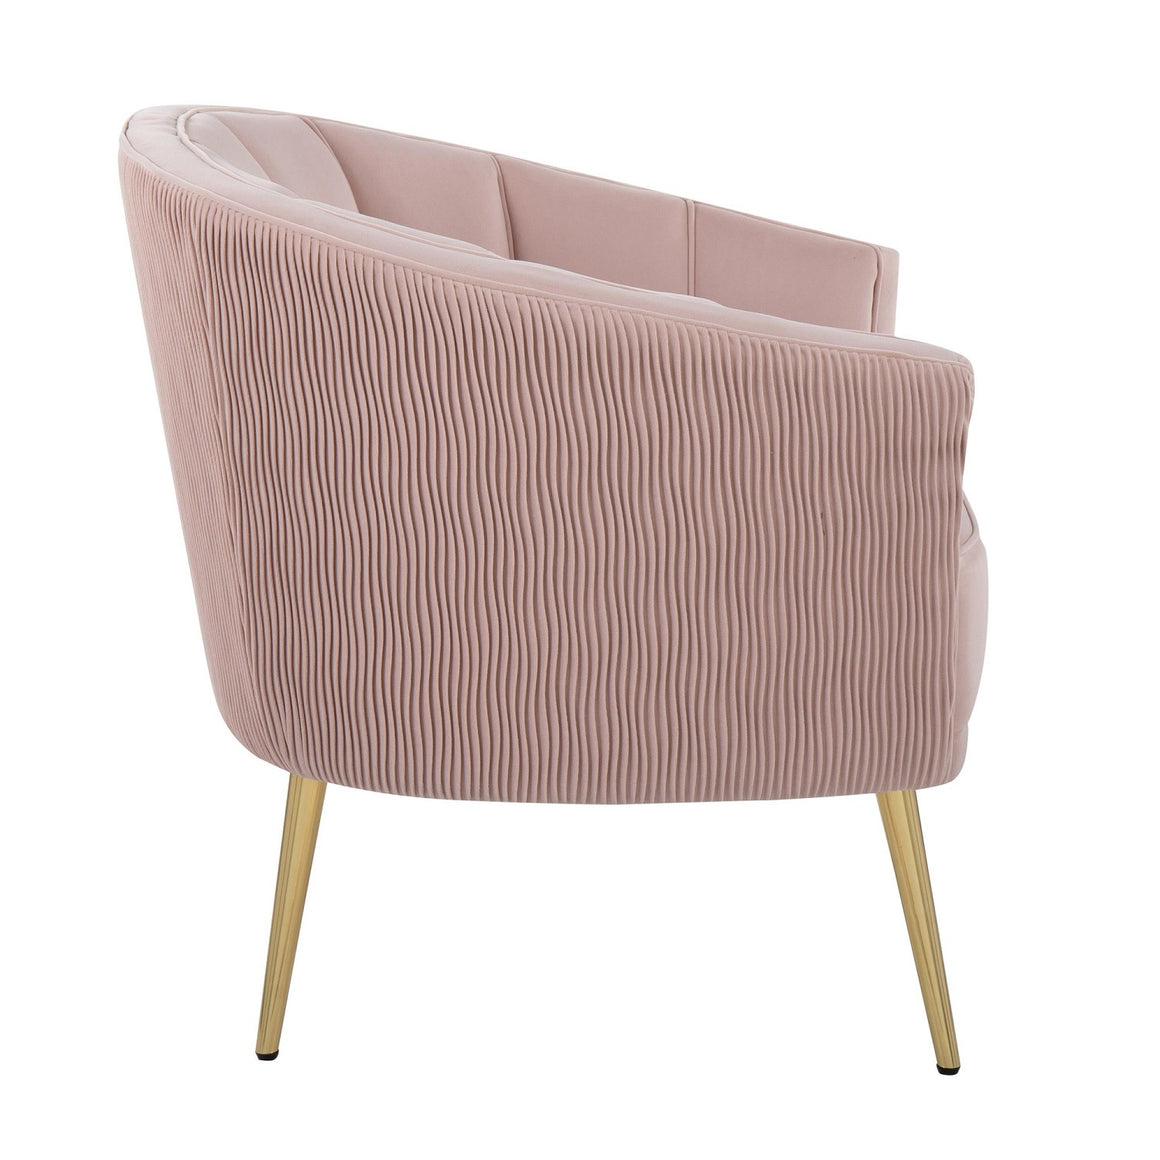 Tania Pleated Waves Accent Chair in Gold Steel and Blush Pink Velvet by Lumisource